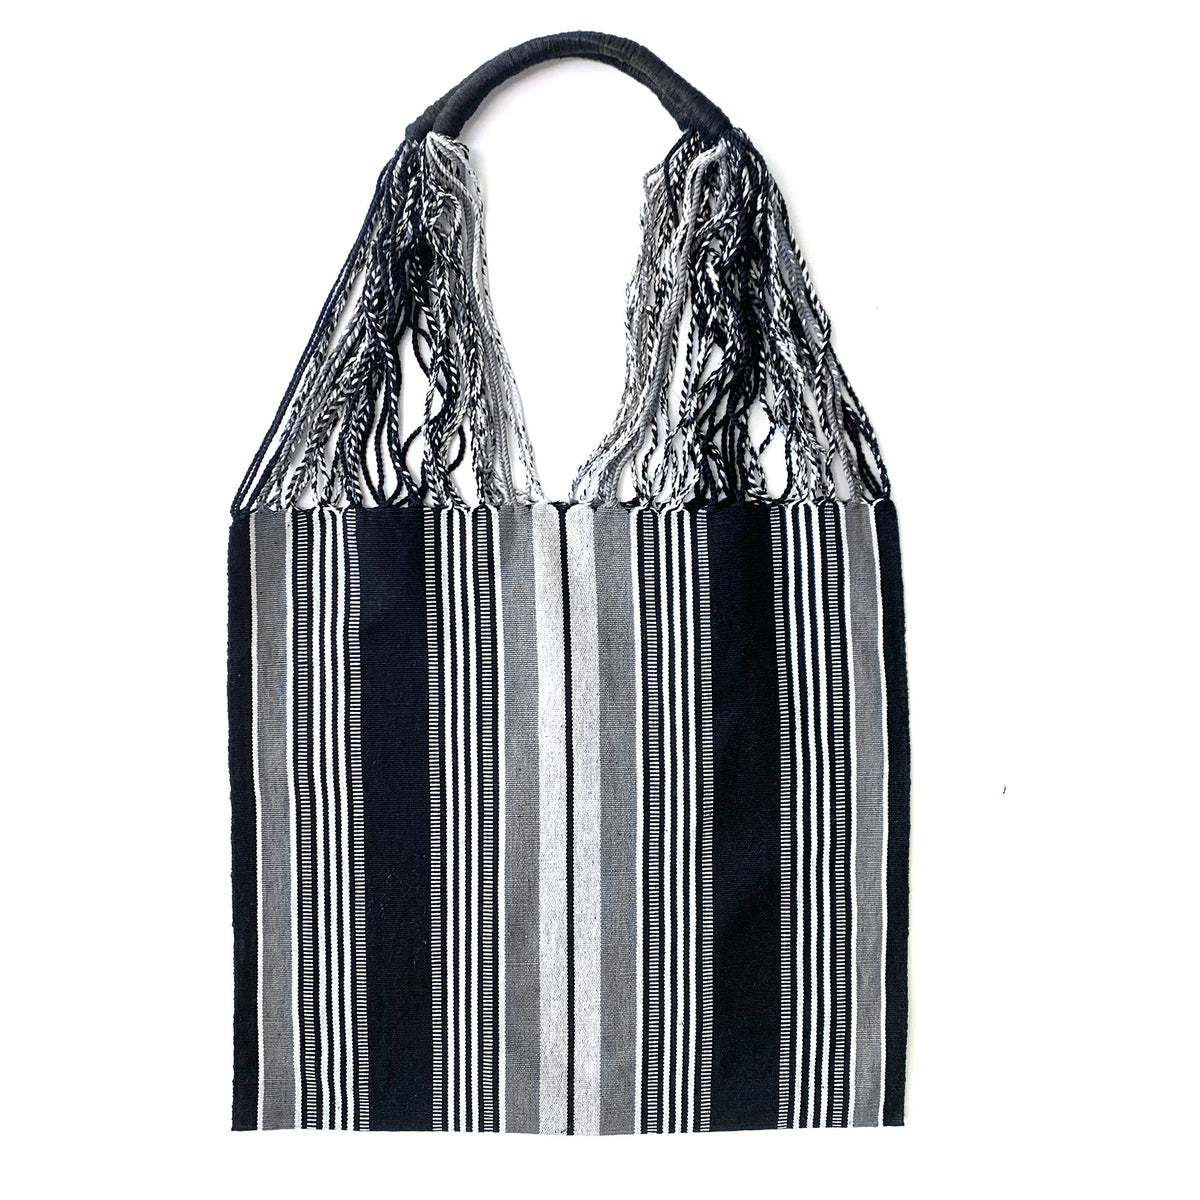 handwoven tote bag with twisted fringe handle, black gray and white